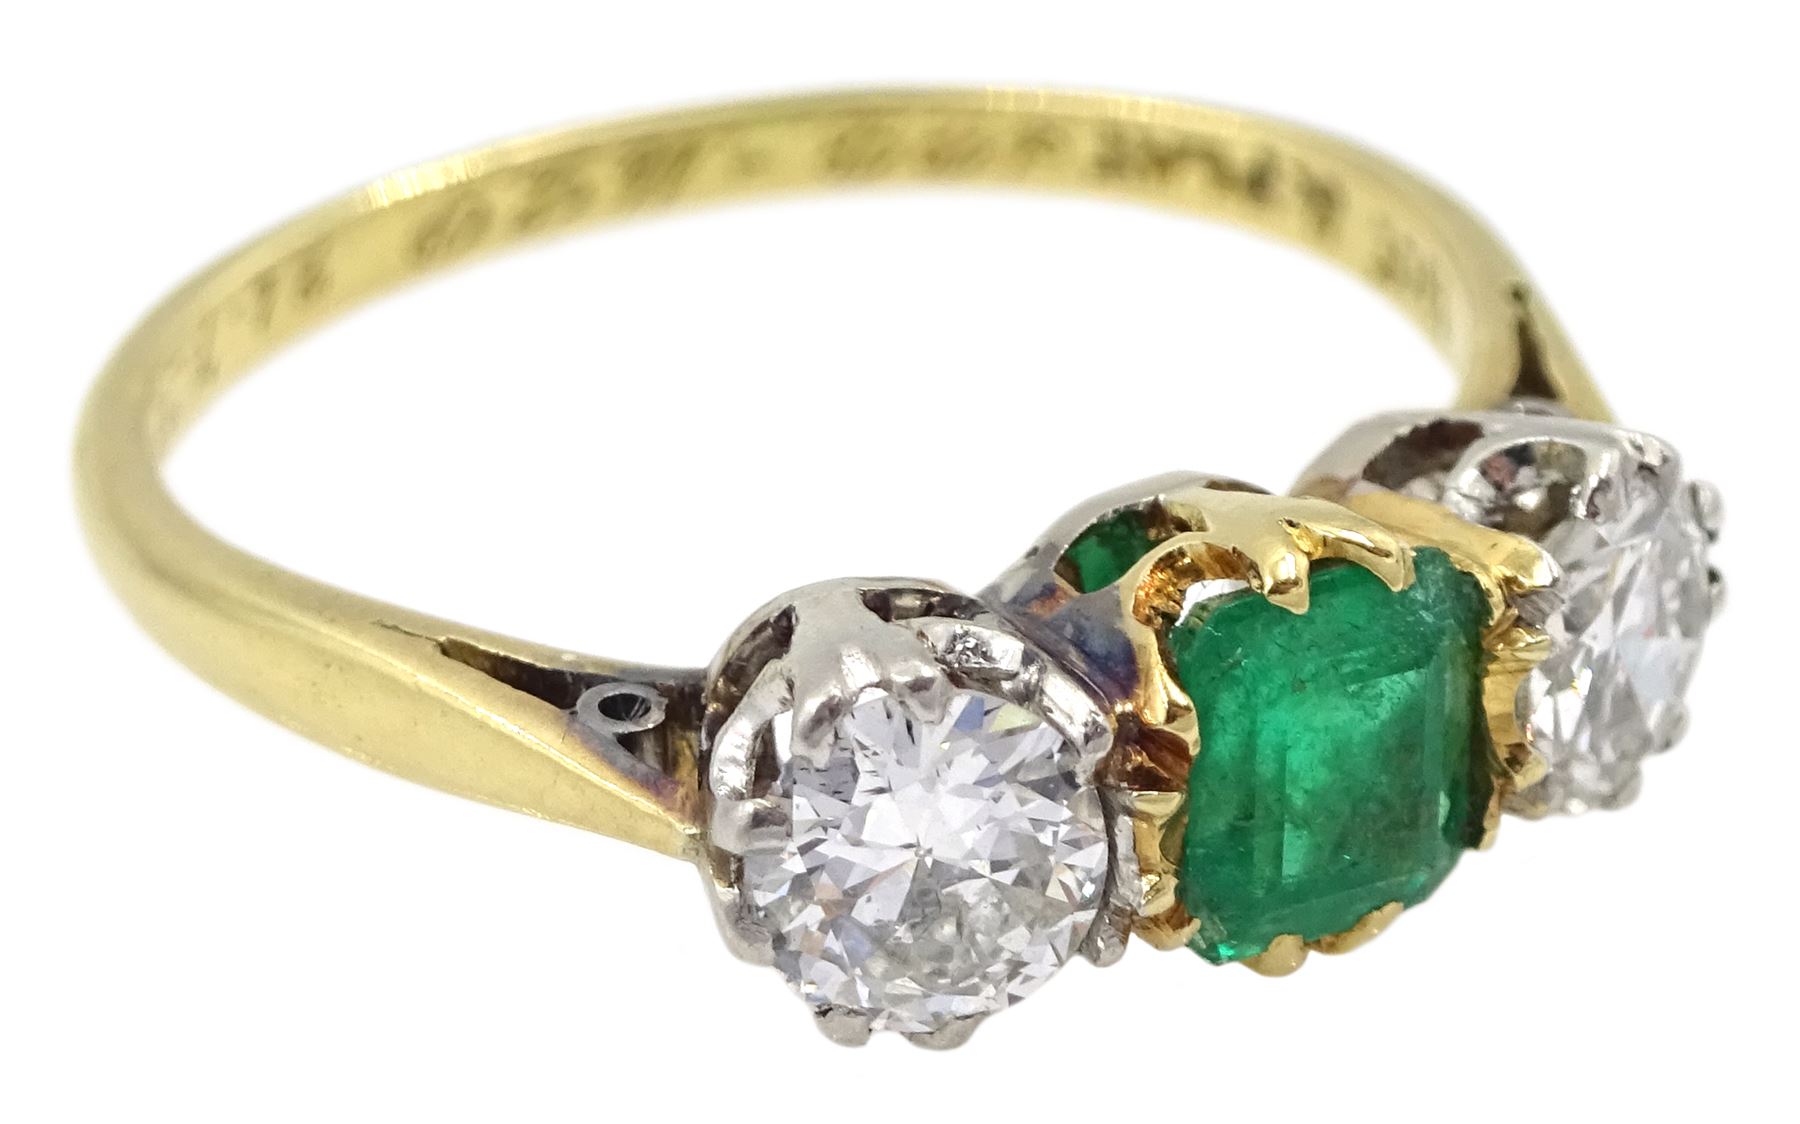 Early 20th century gold three stone old cut diamond and emerald ring - Image 7 of 7